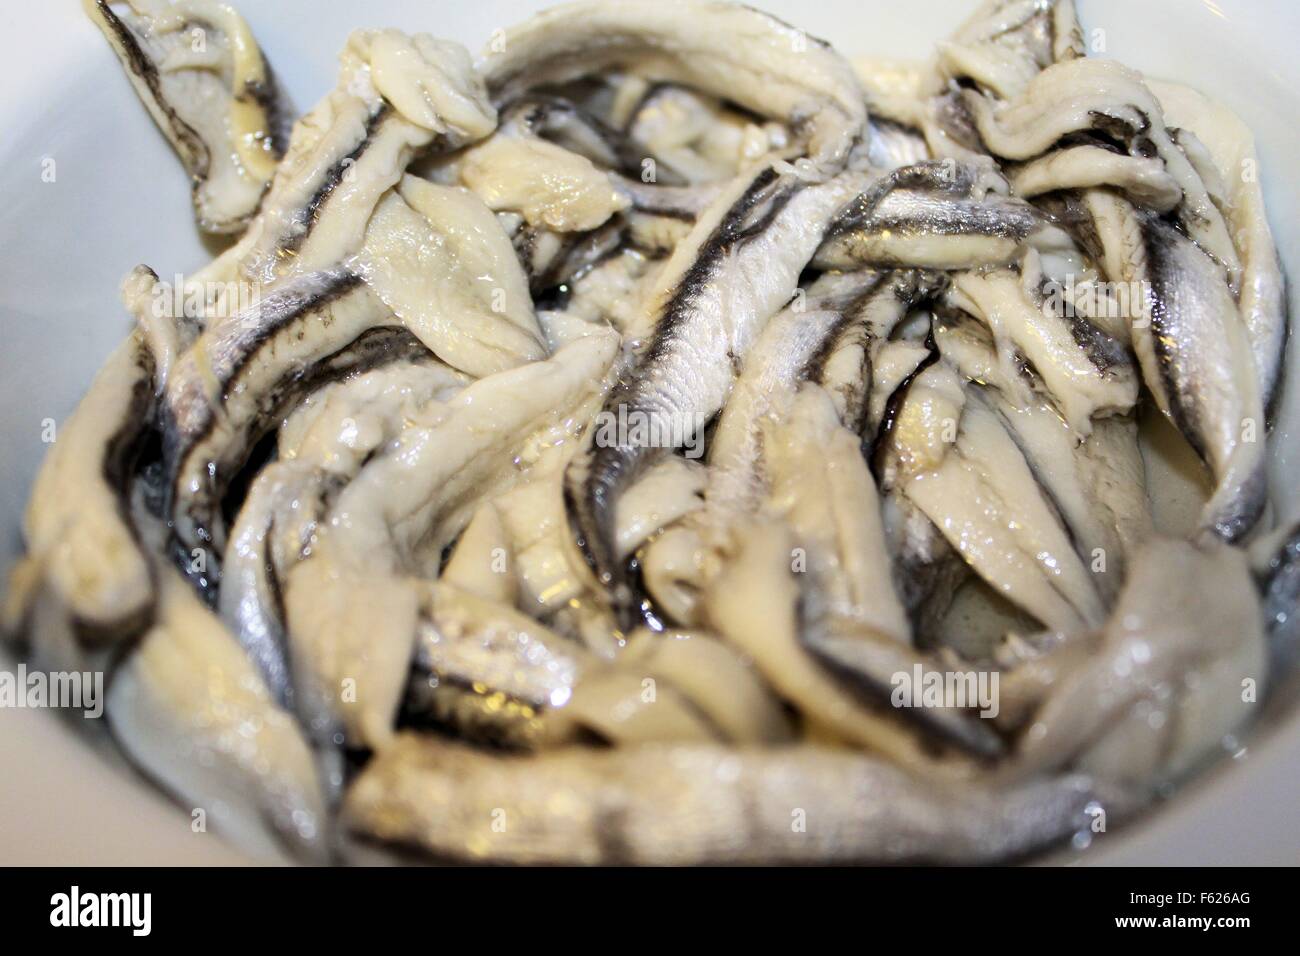 anchovy fillets marinated in small bowl Stock Photo